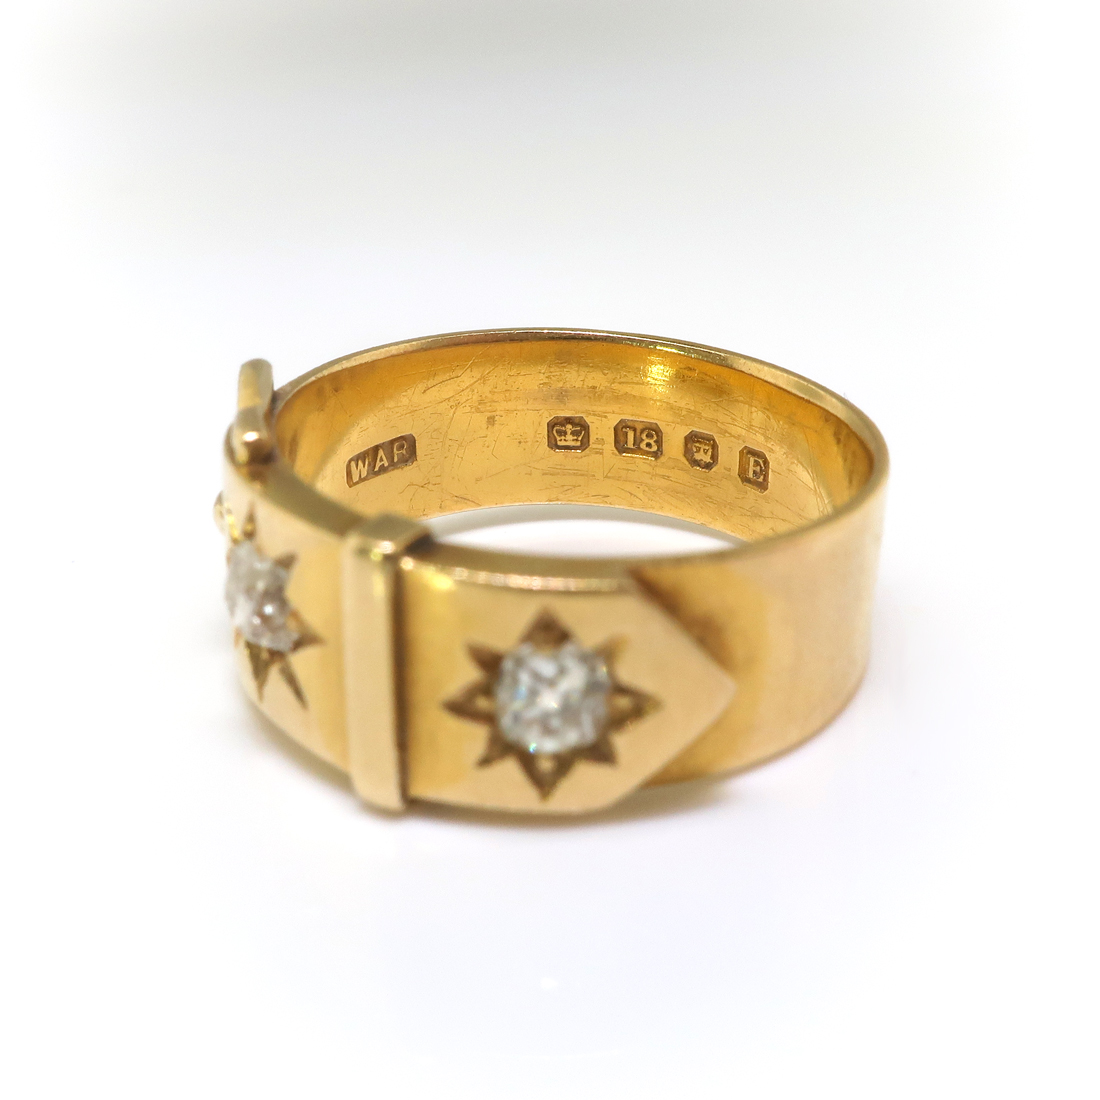 Antique and Vintage Rings for Sale – Lancastrian Jewellers